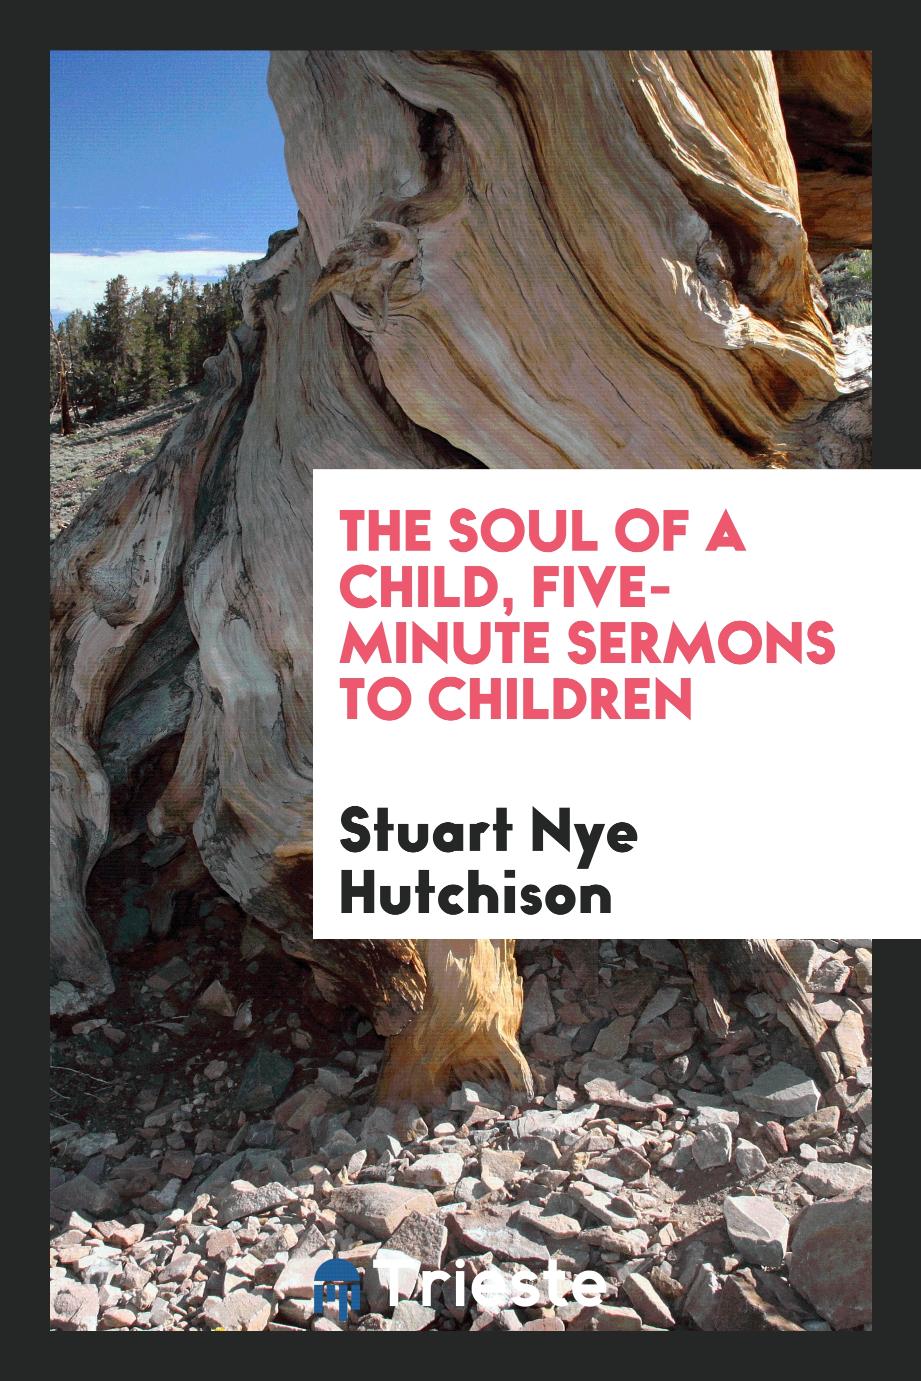 The soul of a child, five-minute sermons to children